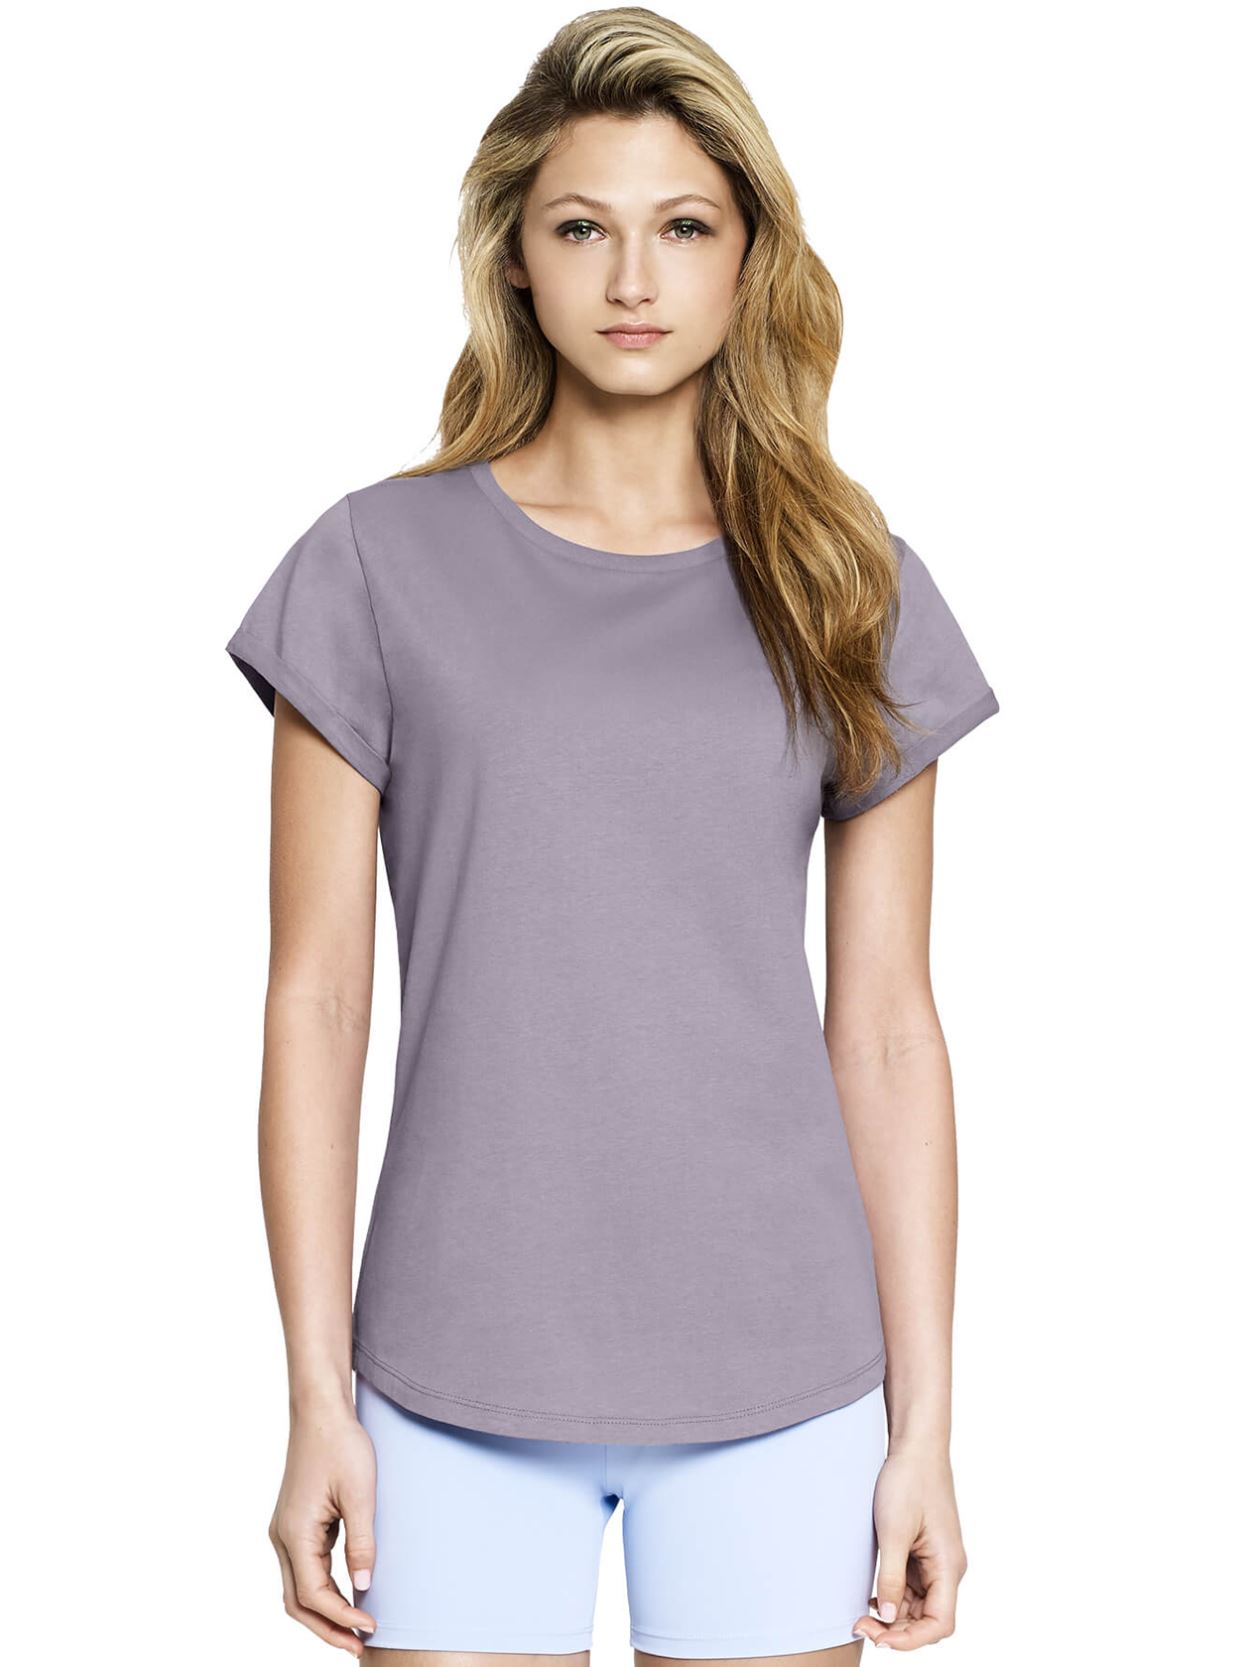 EP16 Women's Rolled Sleeve T Shirt Image 3